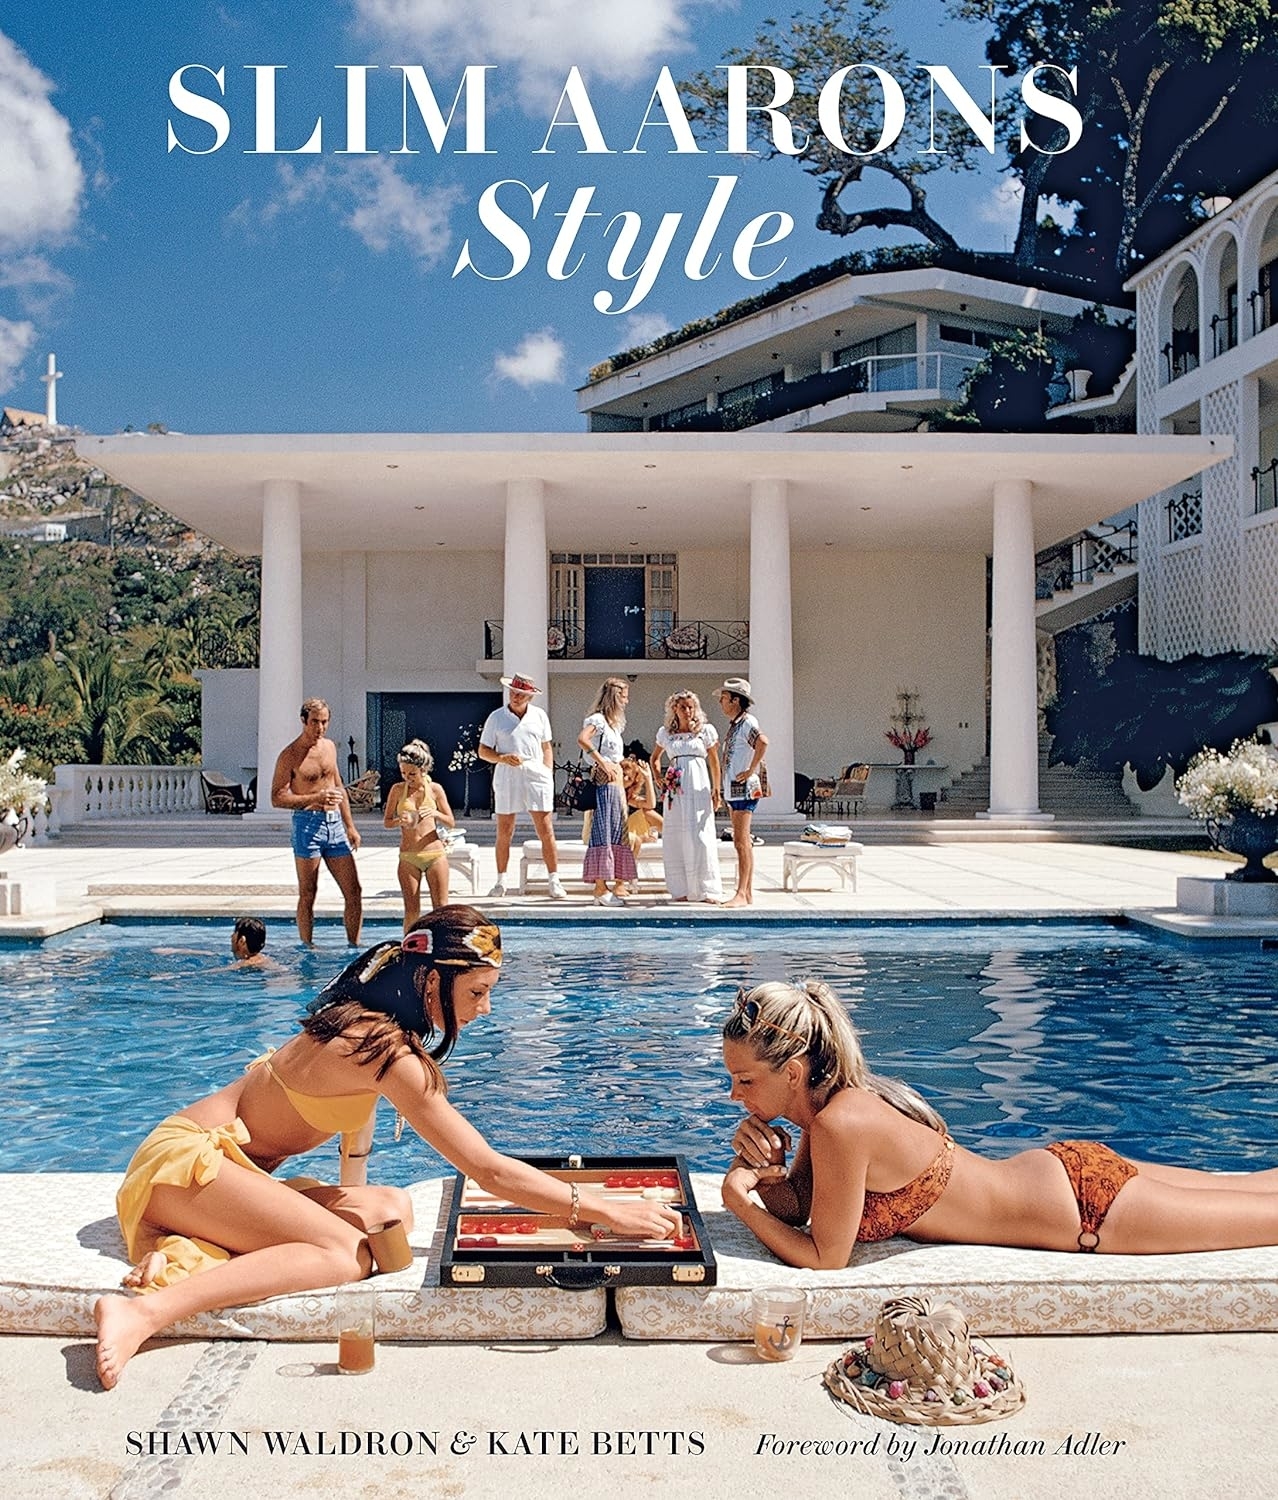 Book cover of &quot;Slim Aarons: Style&quot; showing people by a pool playing games and socializing